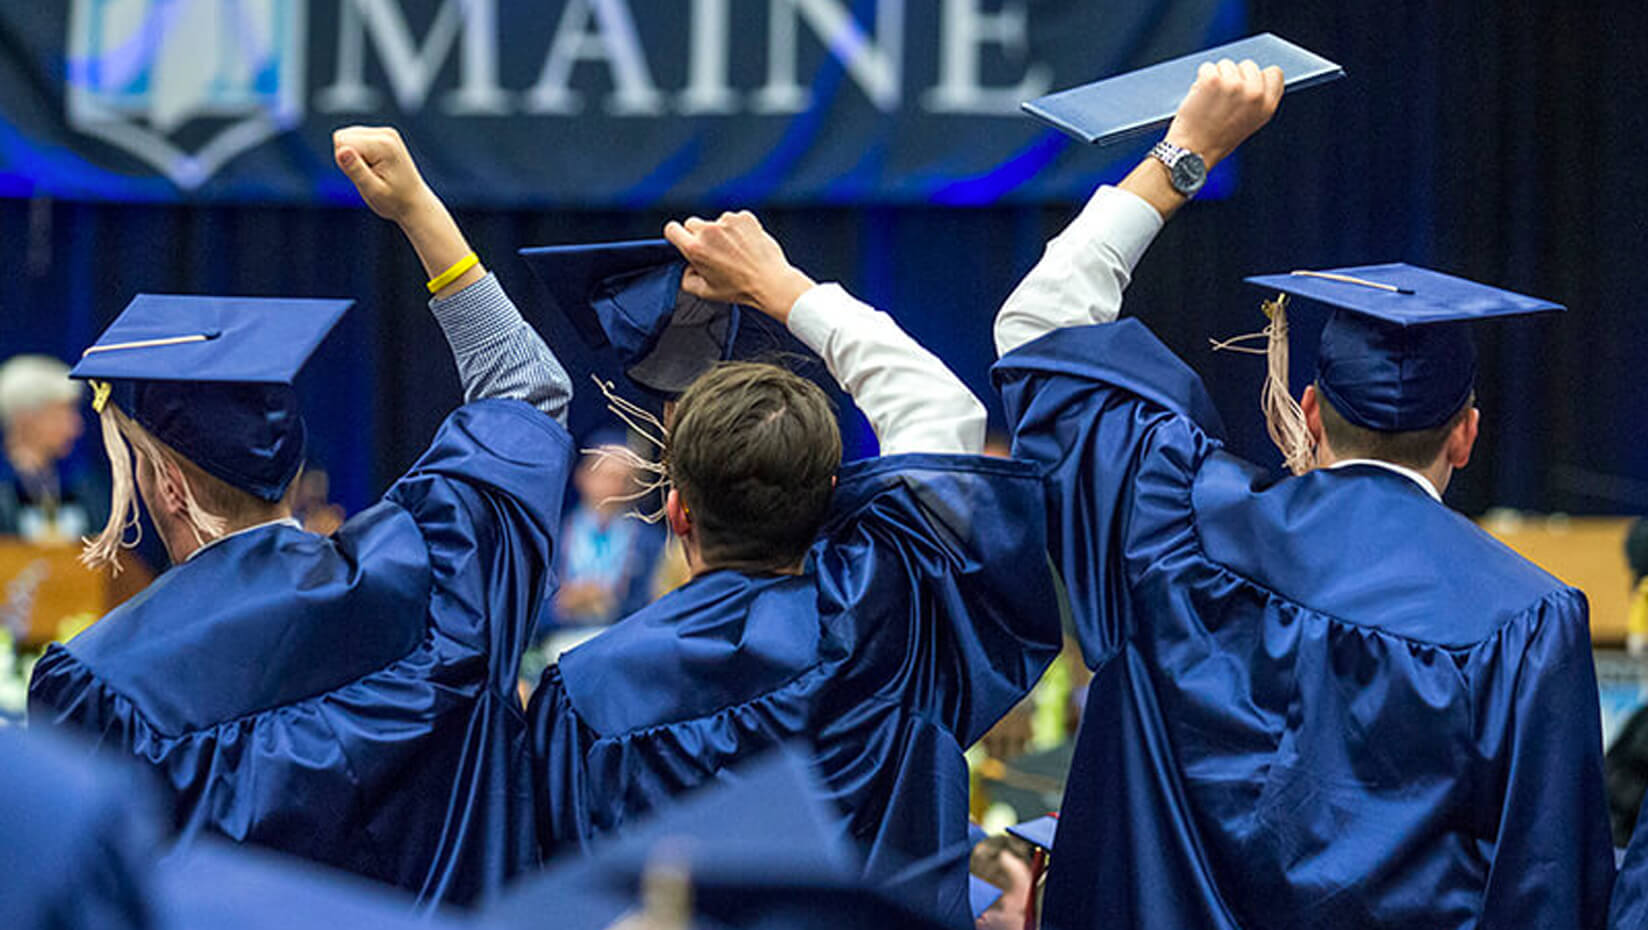 UMaine students at Commencement